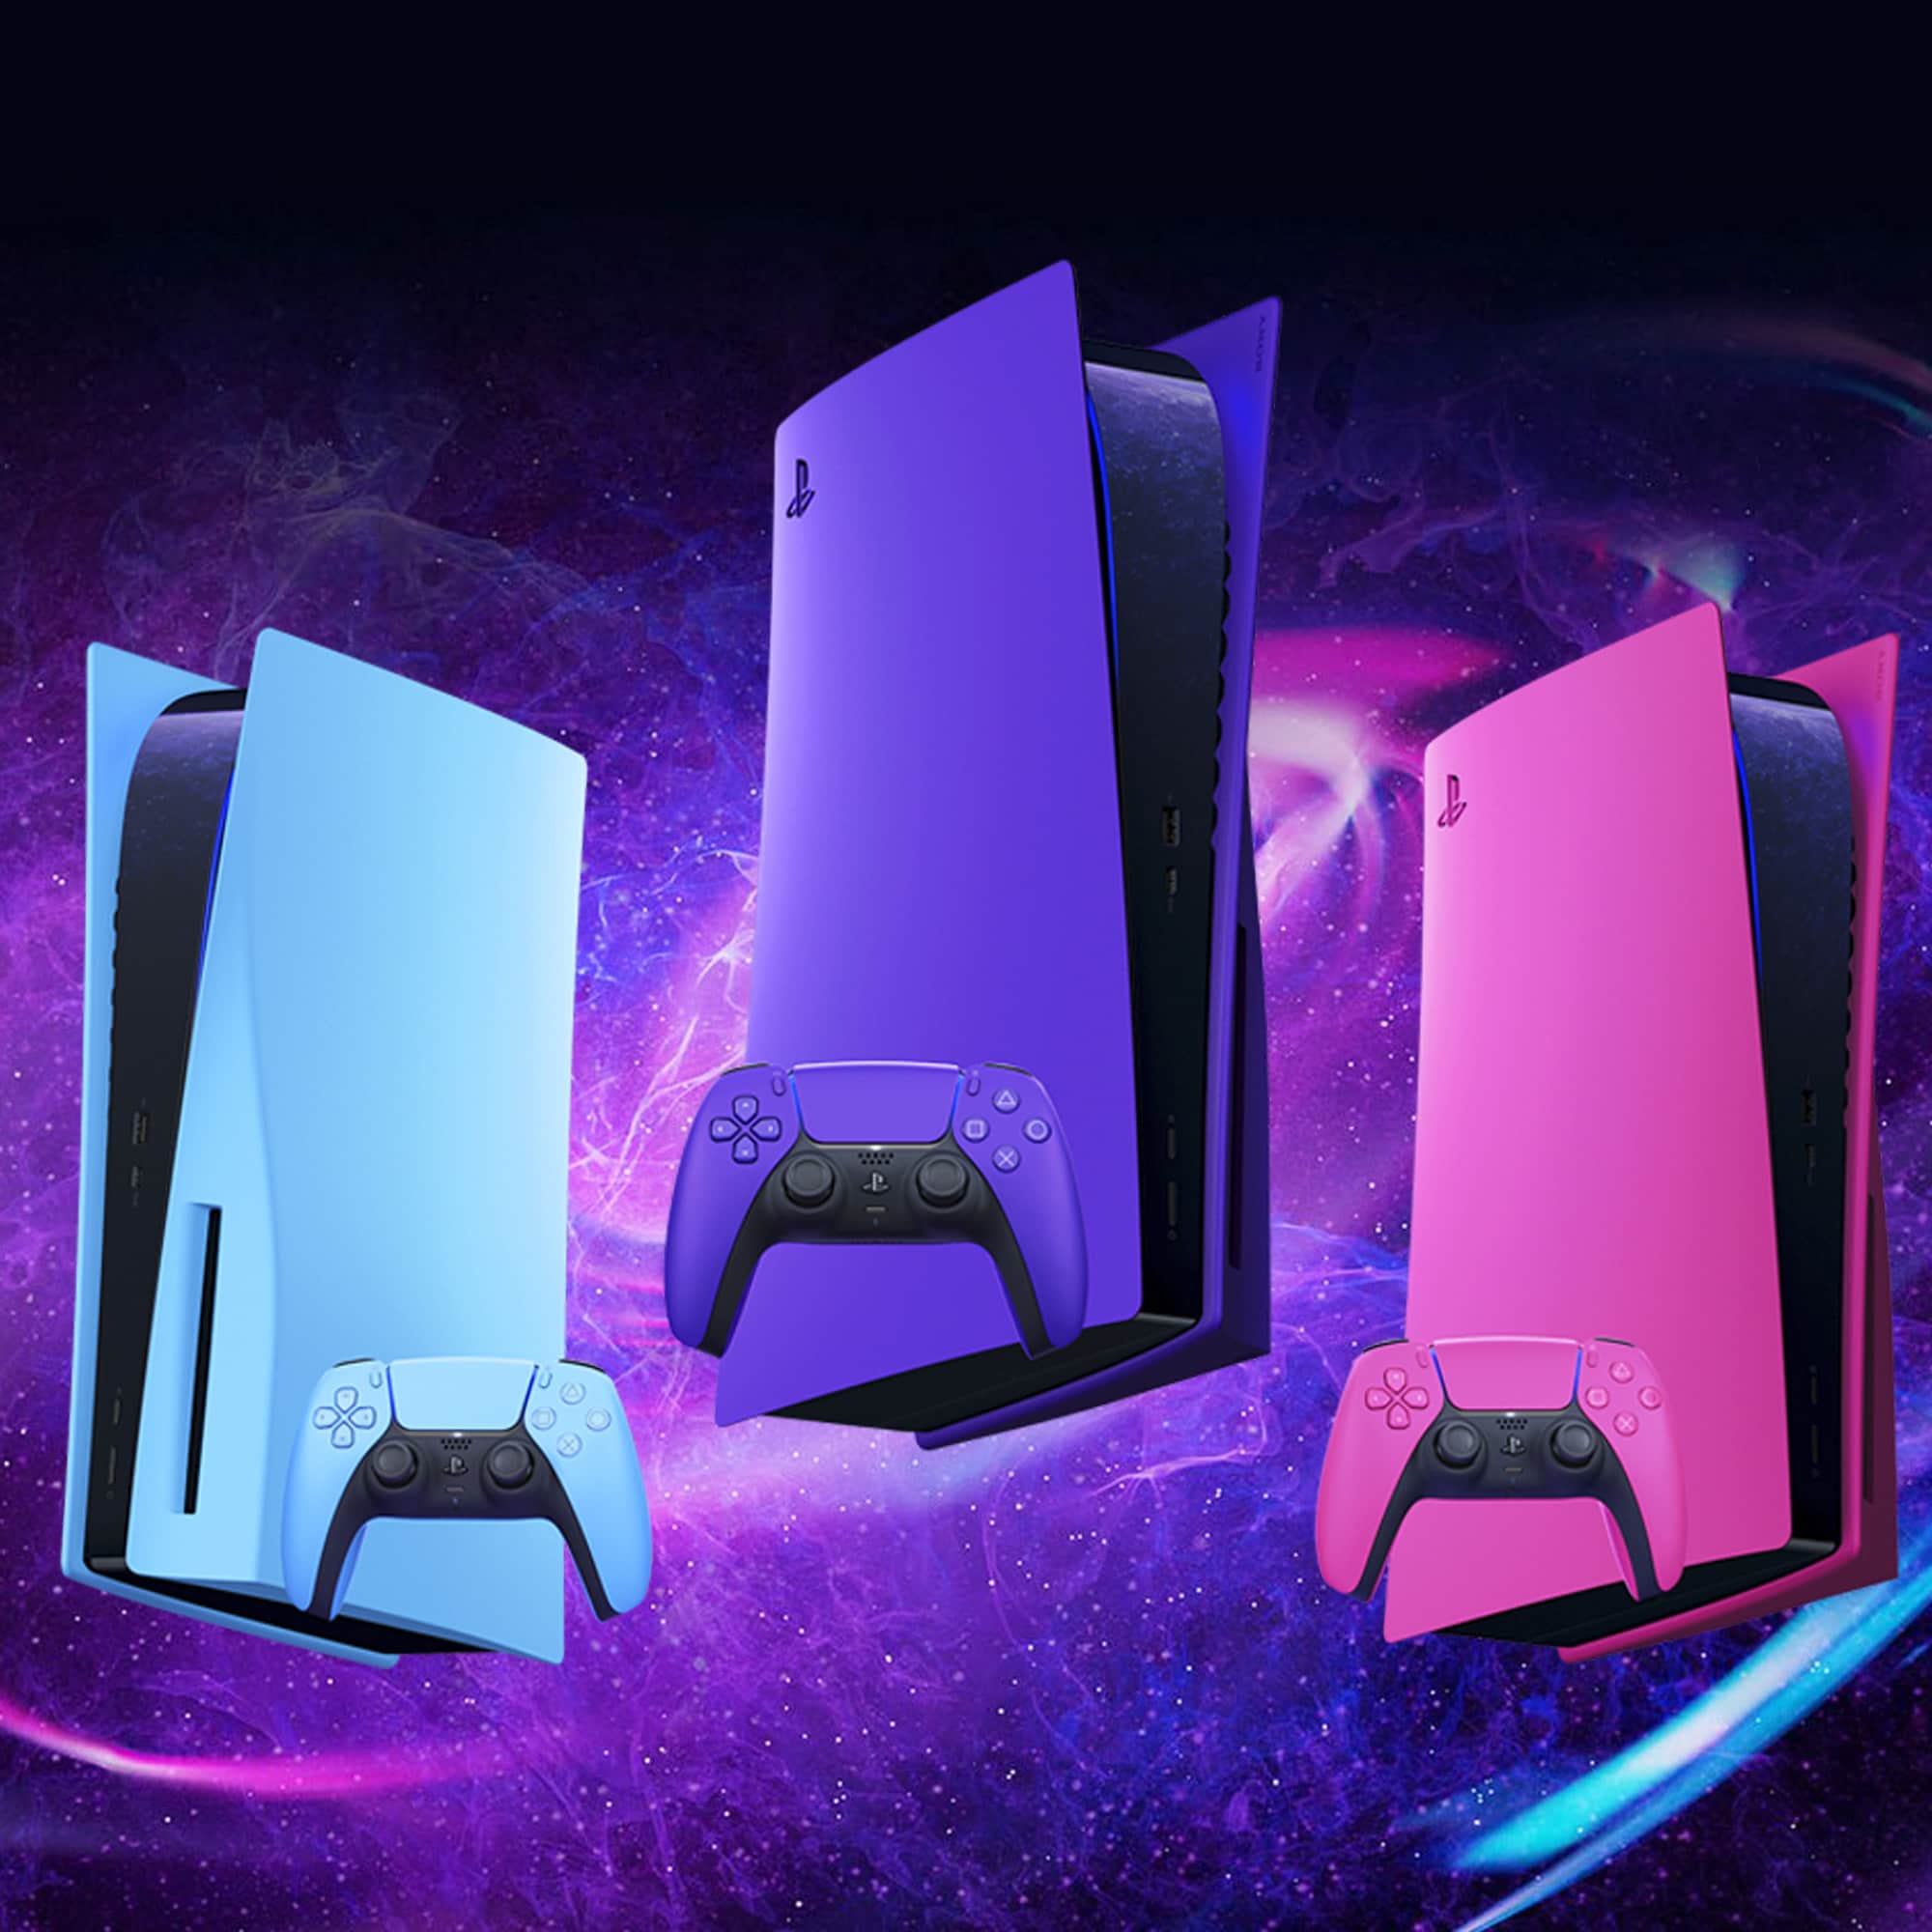 https://thelatch.com.au/wp-content/uploads/sites/2/2021/12/ps5-faceplates-covers-controllers-galaxy-collection-1.jpg